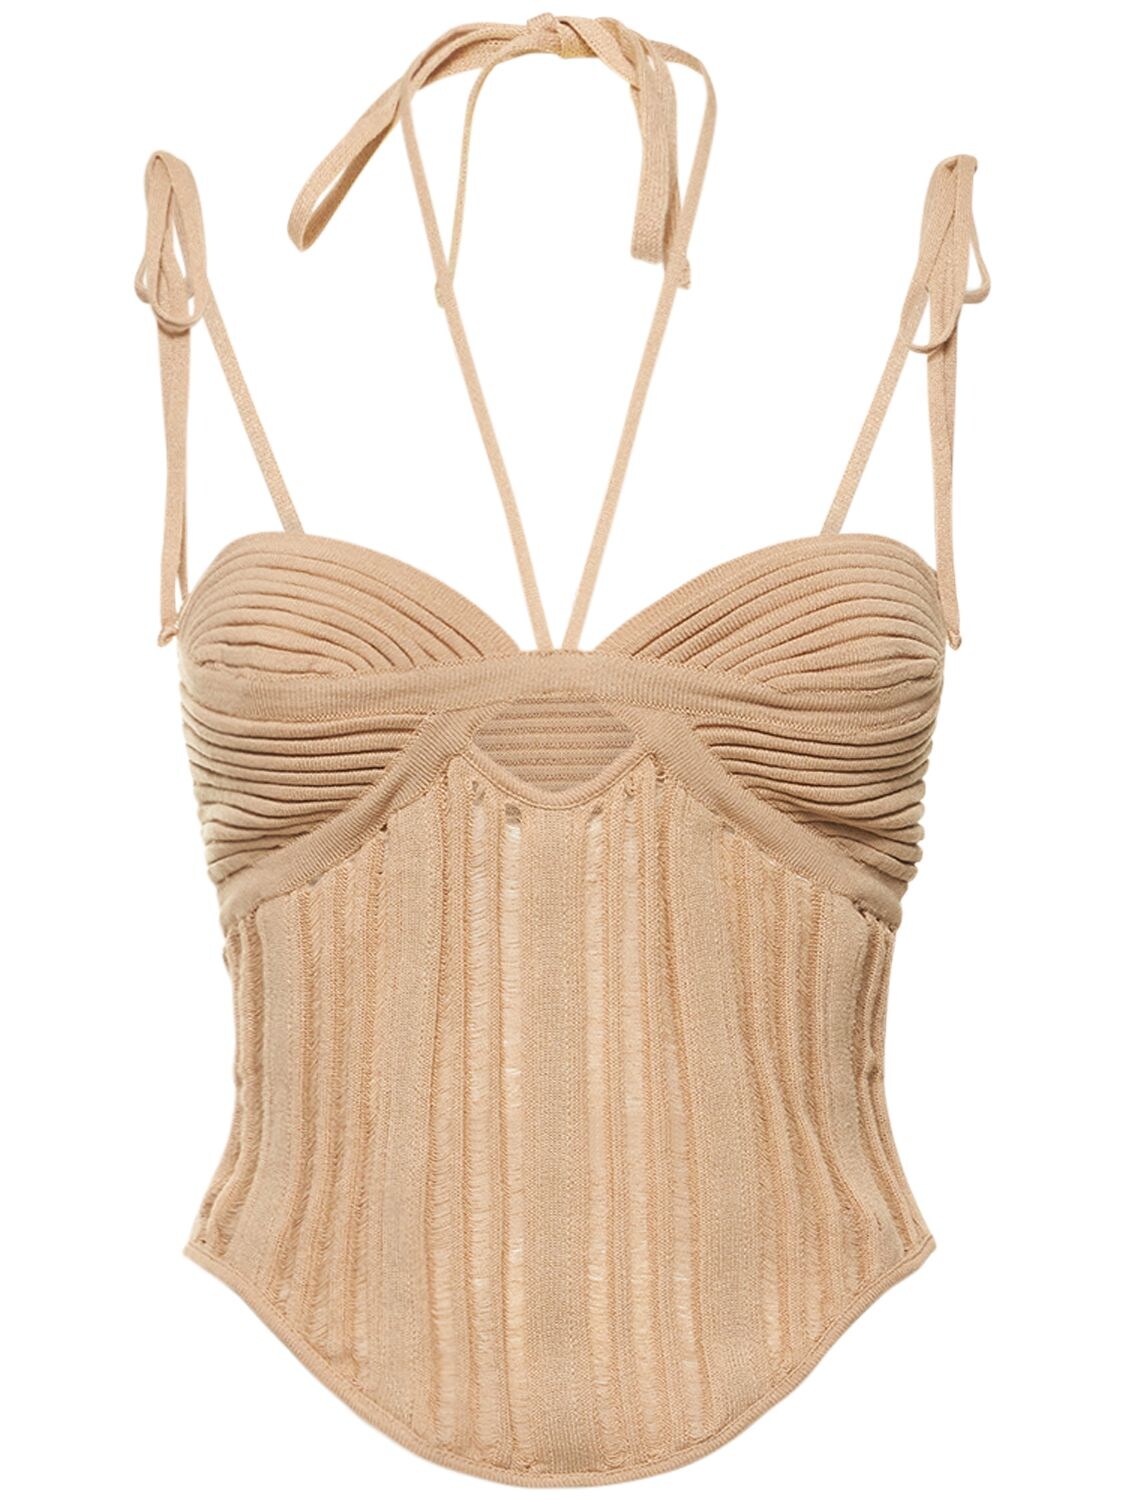 Andreädamo Floating Ribbed Corset With Spriral Details In Nude & Neutrals